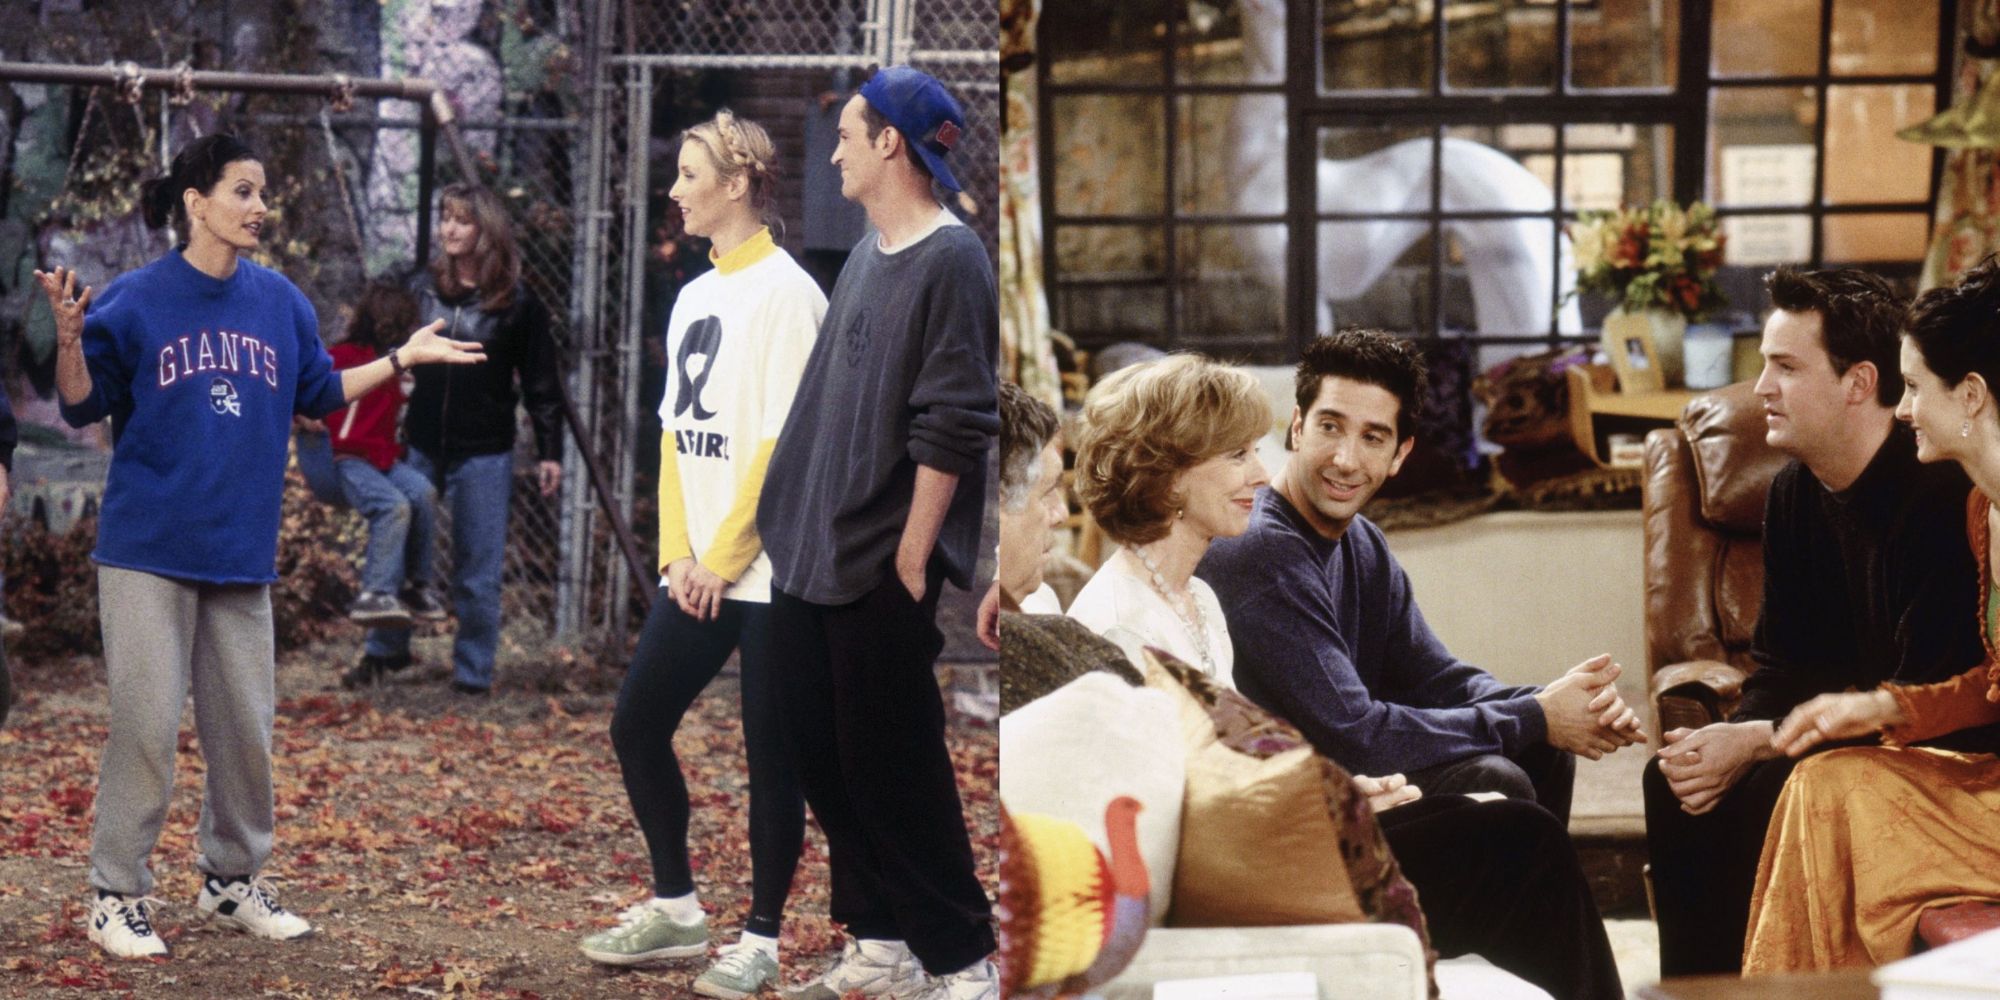 Friends: The 10 Funniest Quotes From The Thanksgiving Episodes